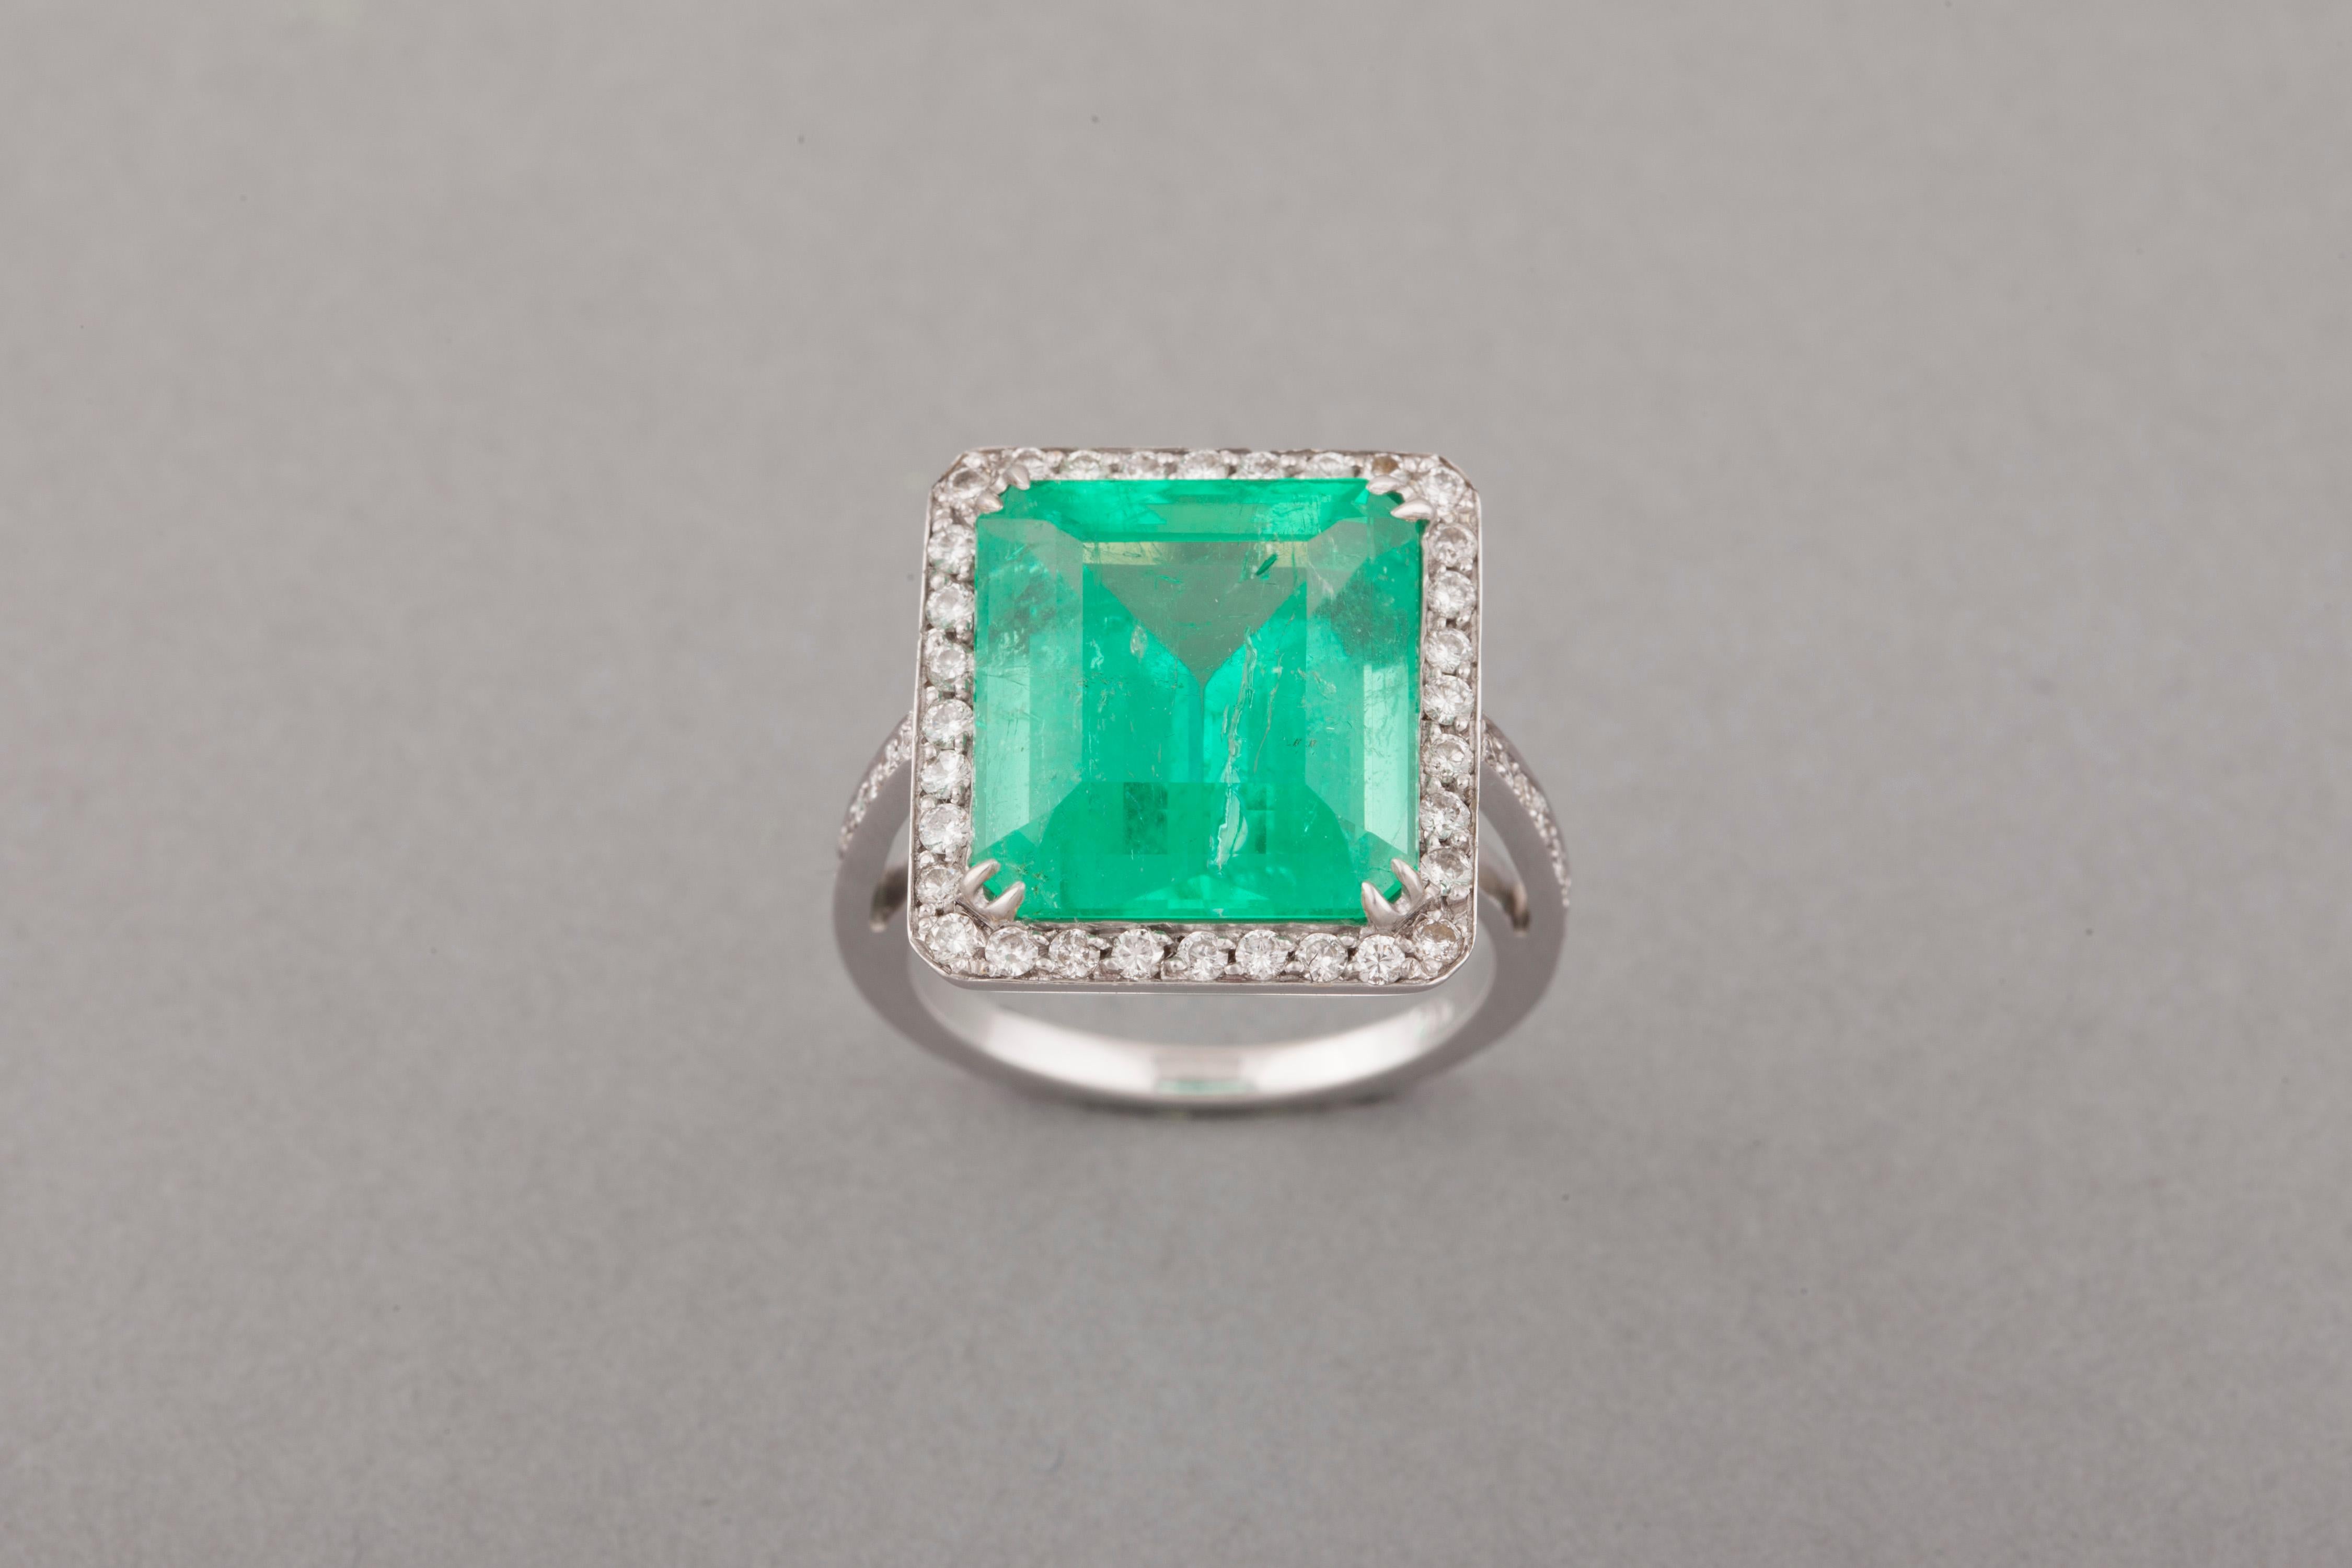 Beautiful and spectacular Diamonds and Emerald Ring. 
French made circa 1980.
The emerald weights 12.06 Carats.
The stone is big and also very clear.
The diamonds weights 1 carat.
Ring size : 7 US or 55 europe.
Total weight: 9.70 grams.
French marks